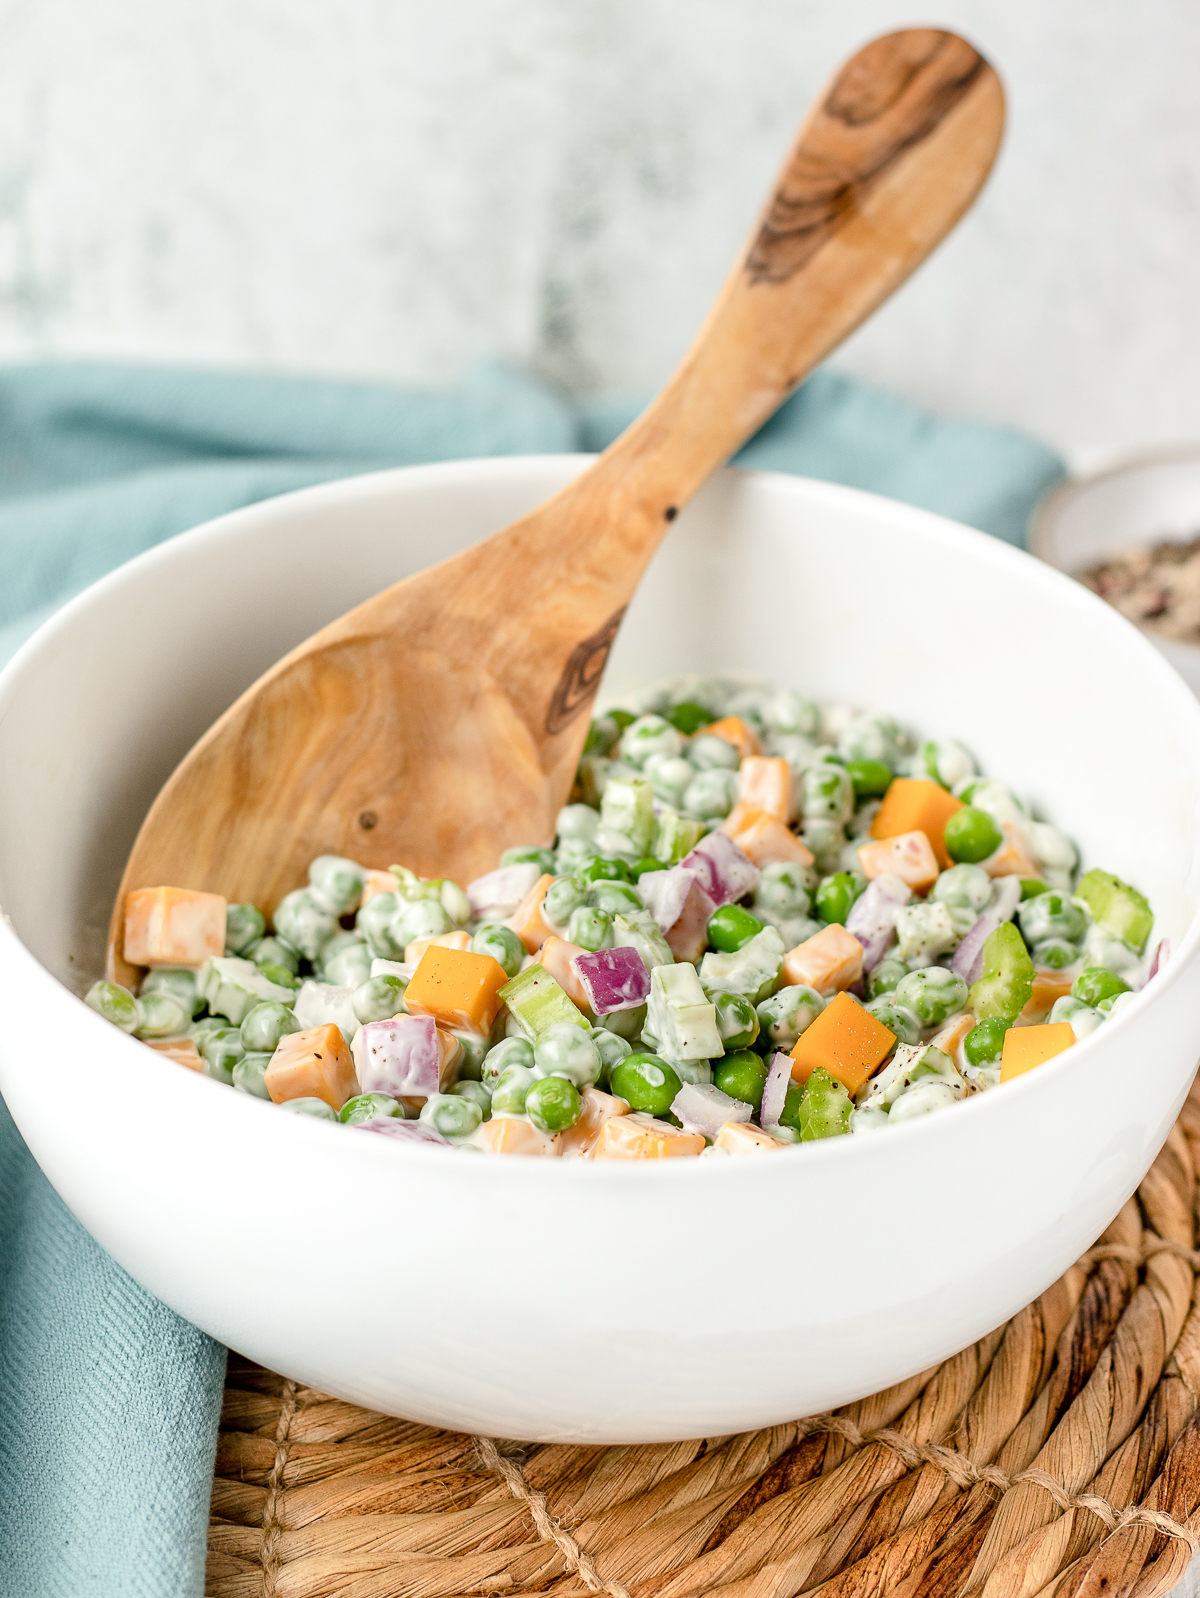 Spoon in a large bowl of colorful pea salad.